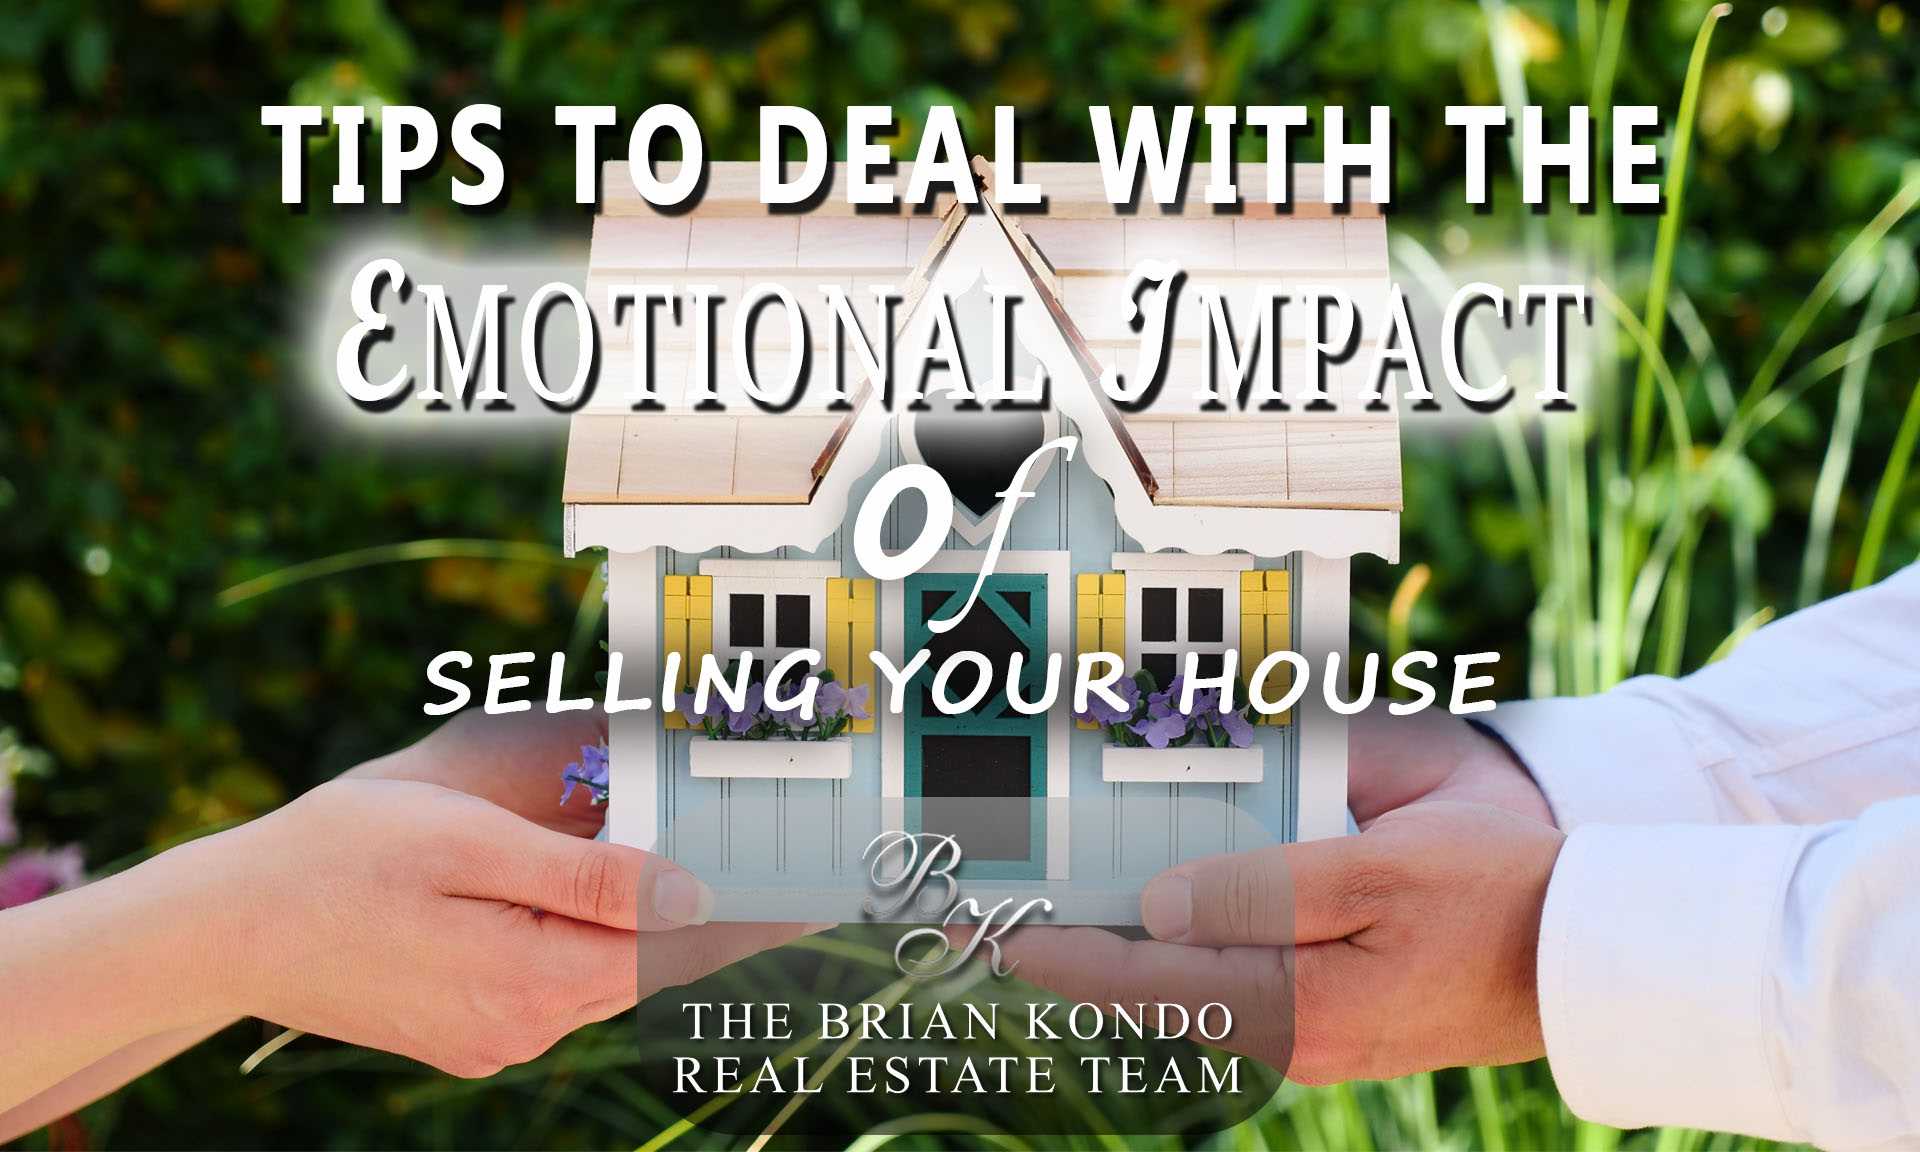 THE HOME YOU LOVE: TIPS TO DEAL WITH THE EMOTIONAL IMPACT OF SELLING YOUR HOUSE